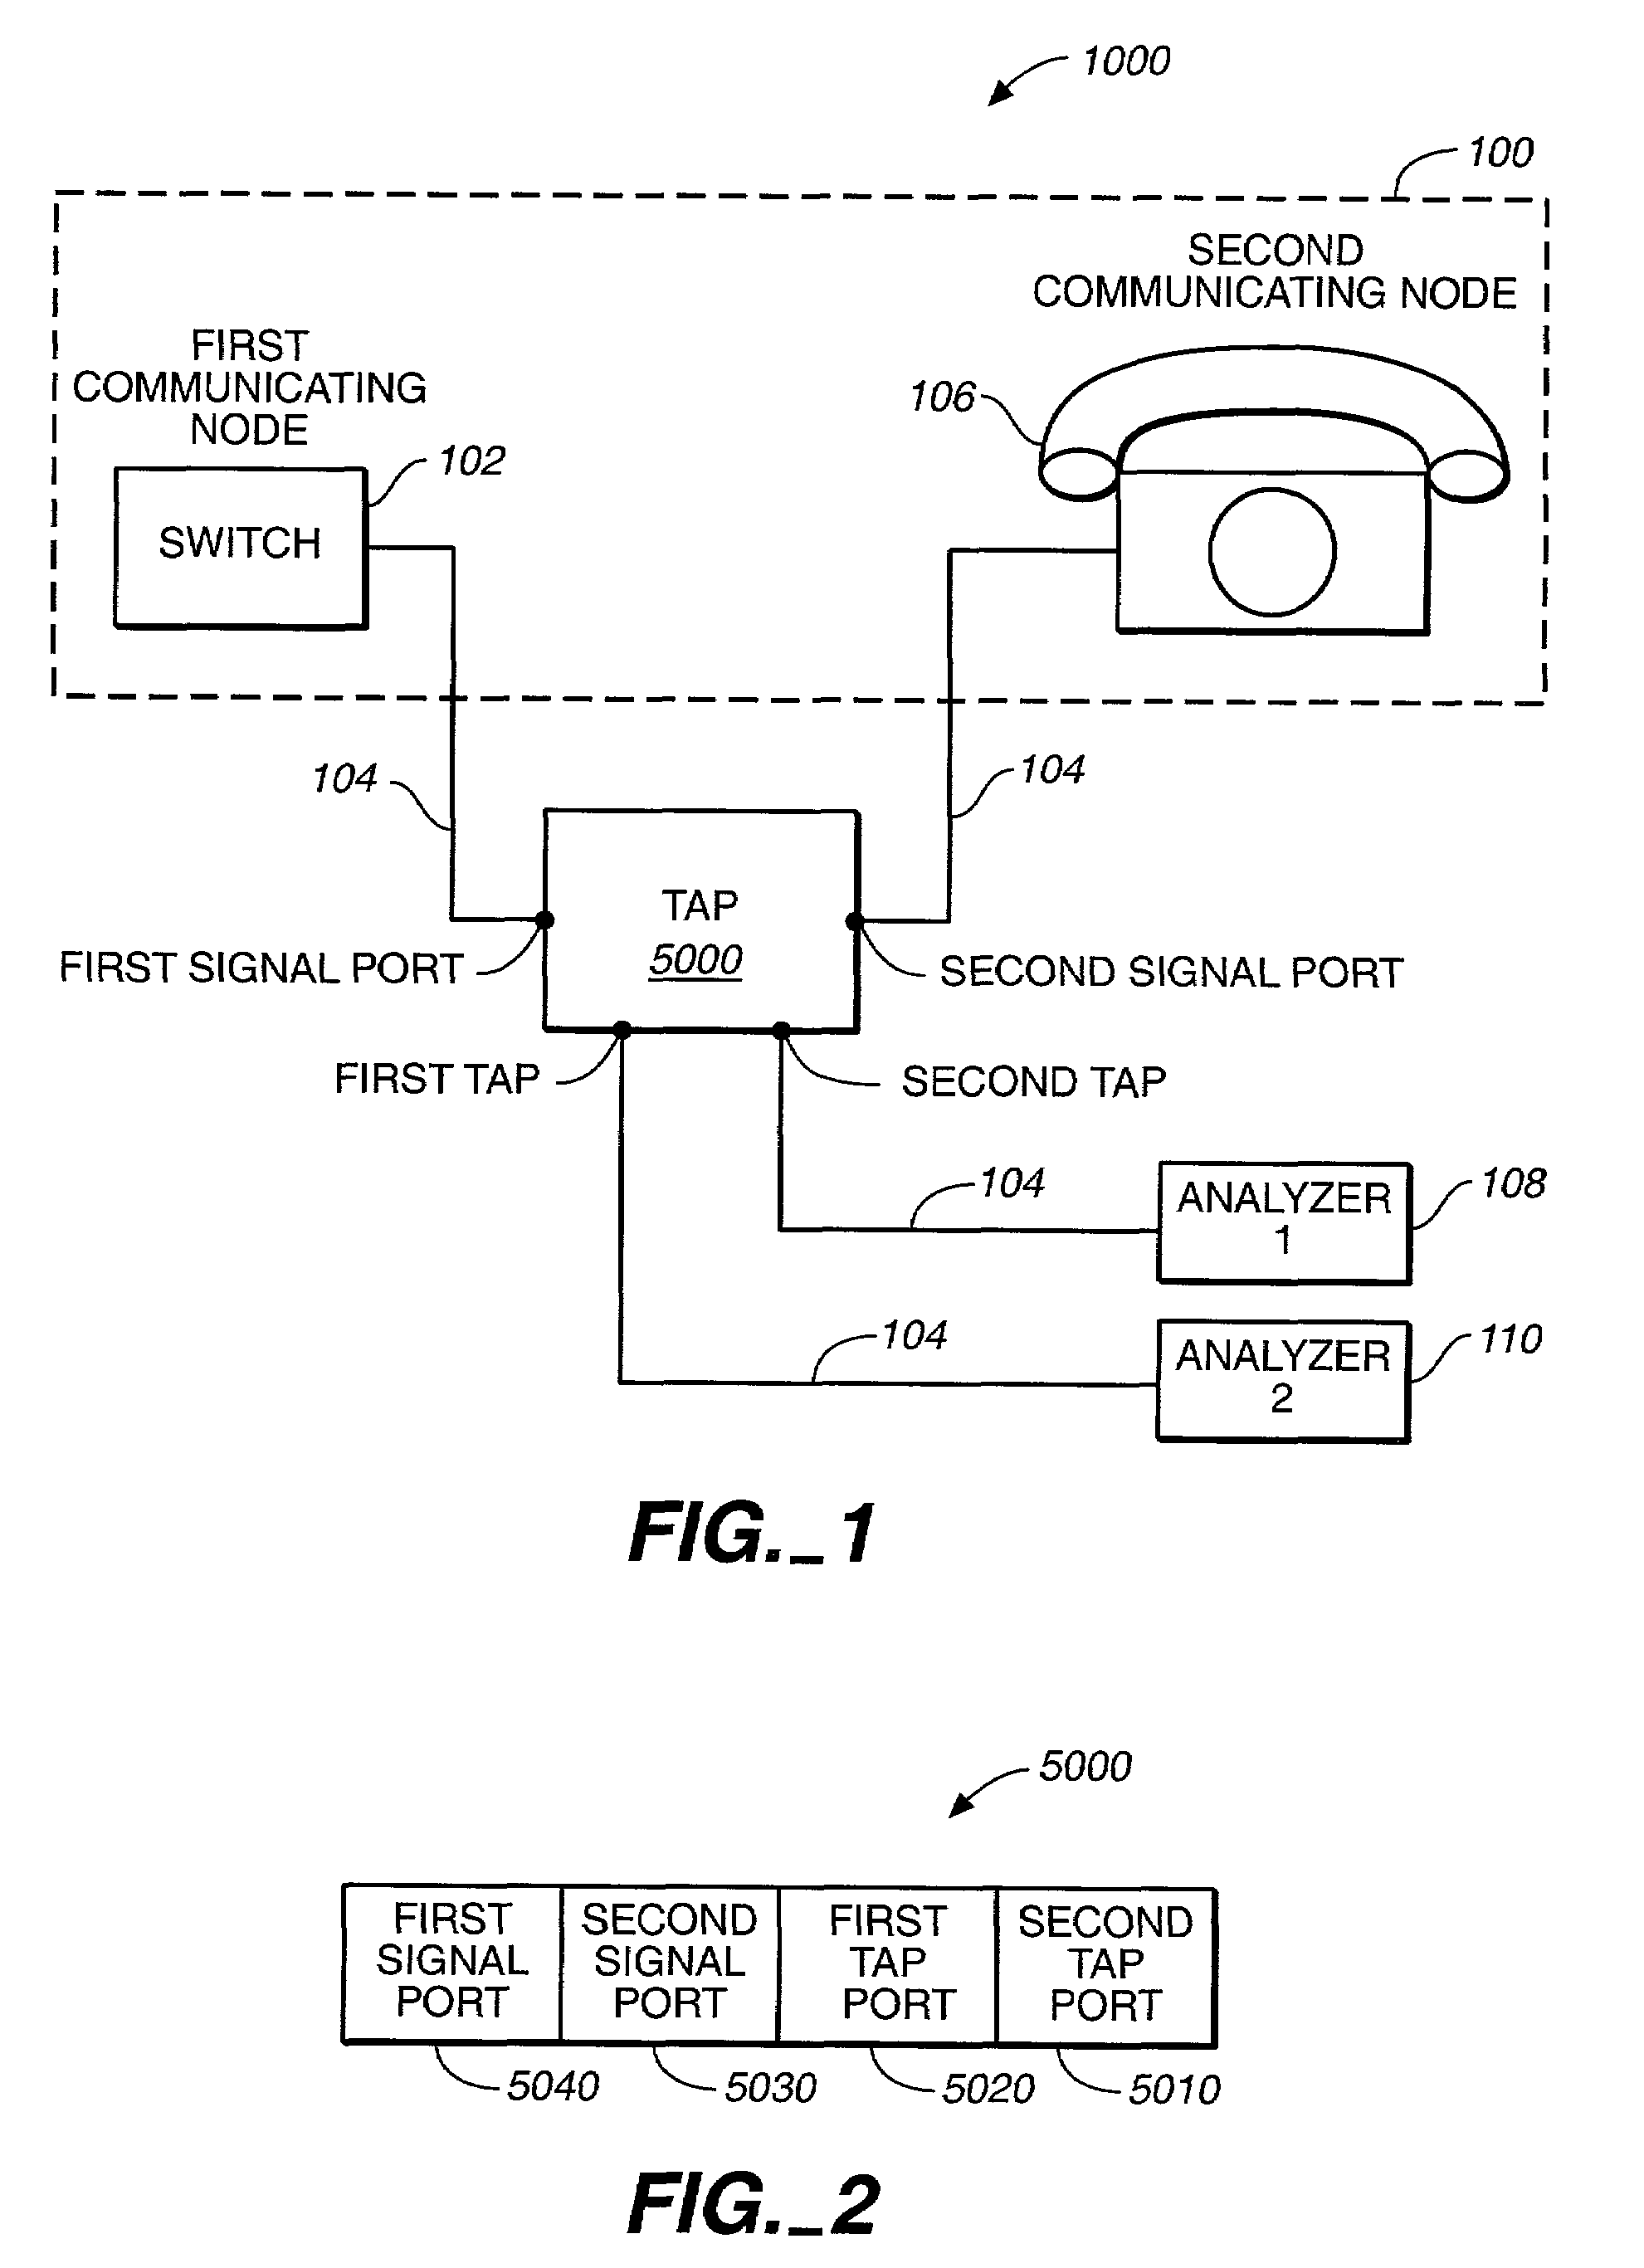 In-line power tap device for Ethernet data signal